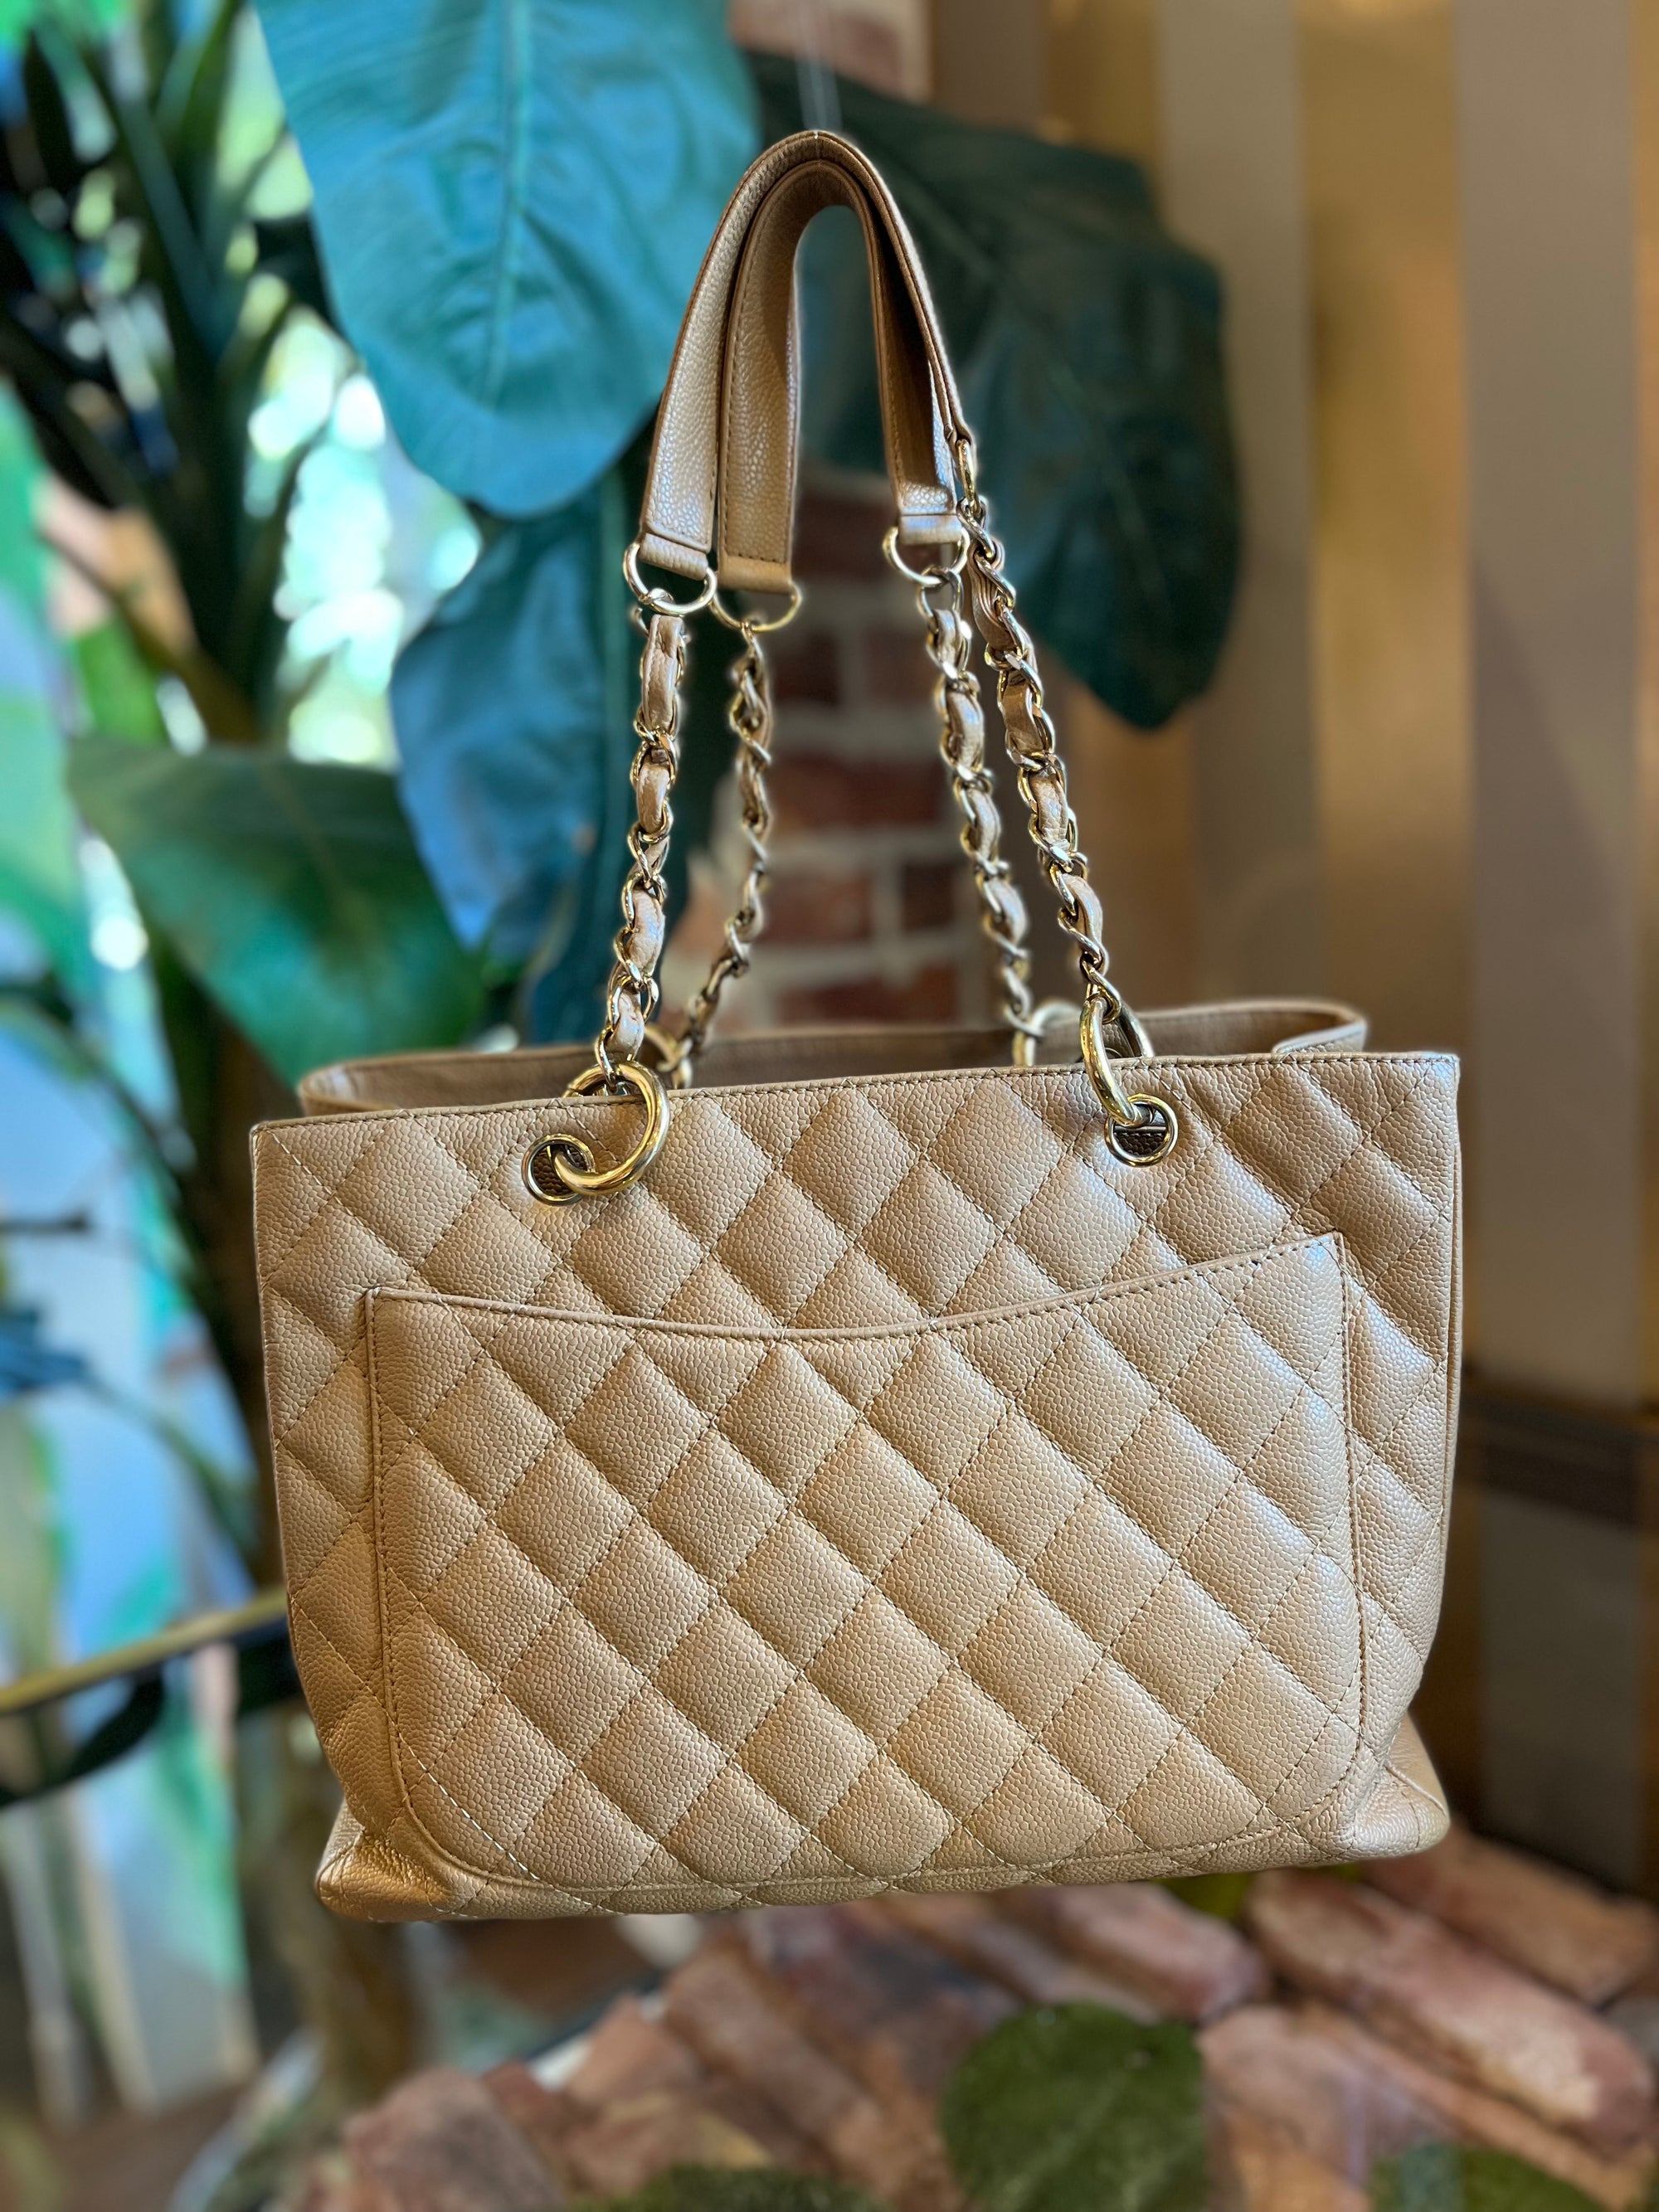 CHANEL Beige Caviar Leather Quilted Grand Shopper Tote GST